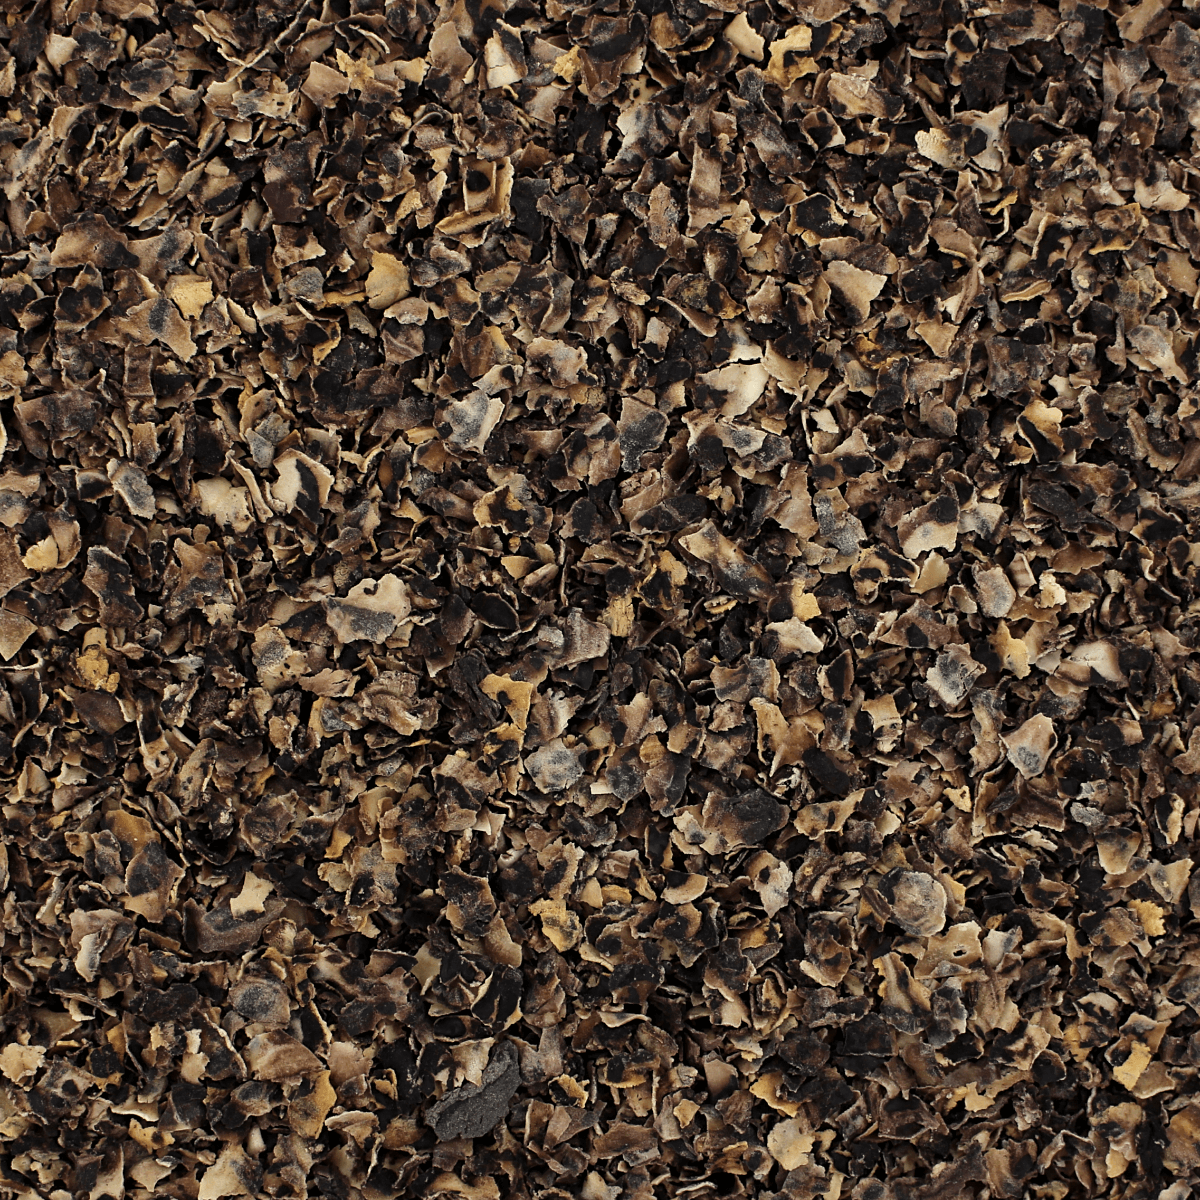 A close up of a pile of black leaves.